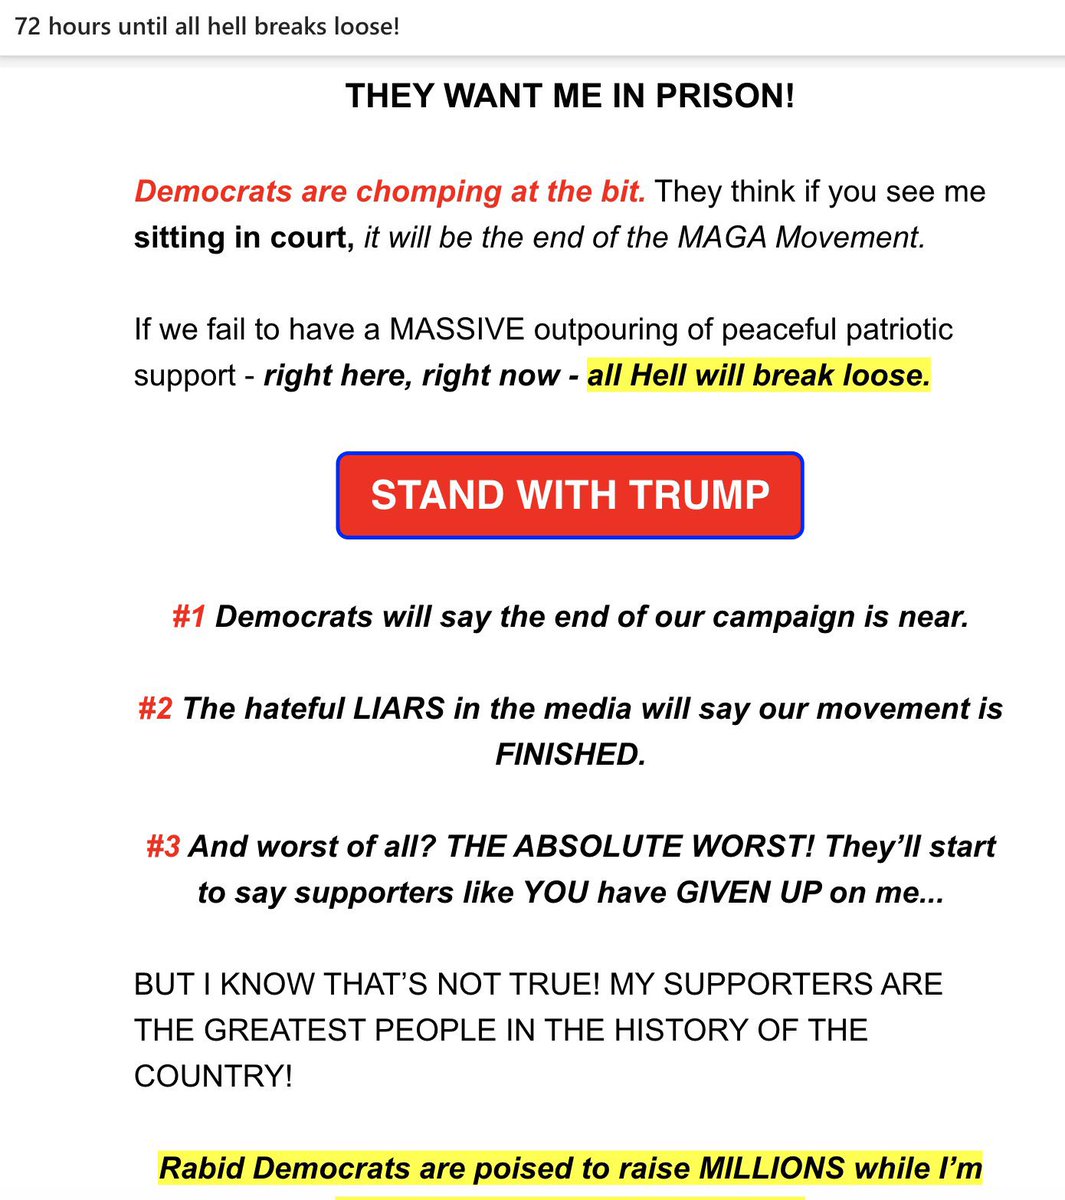 Trump sends fundraising email referencing his first criminal trial threatening “72 hours until all hell breaks loose!”